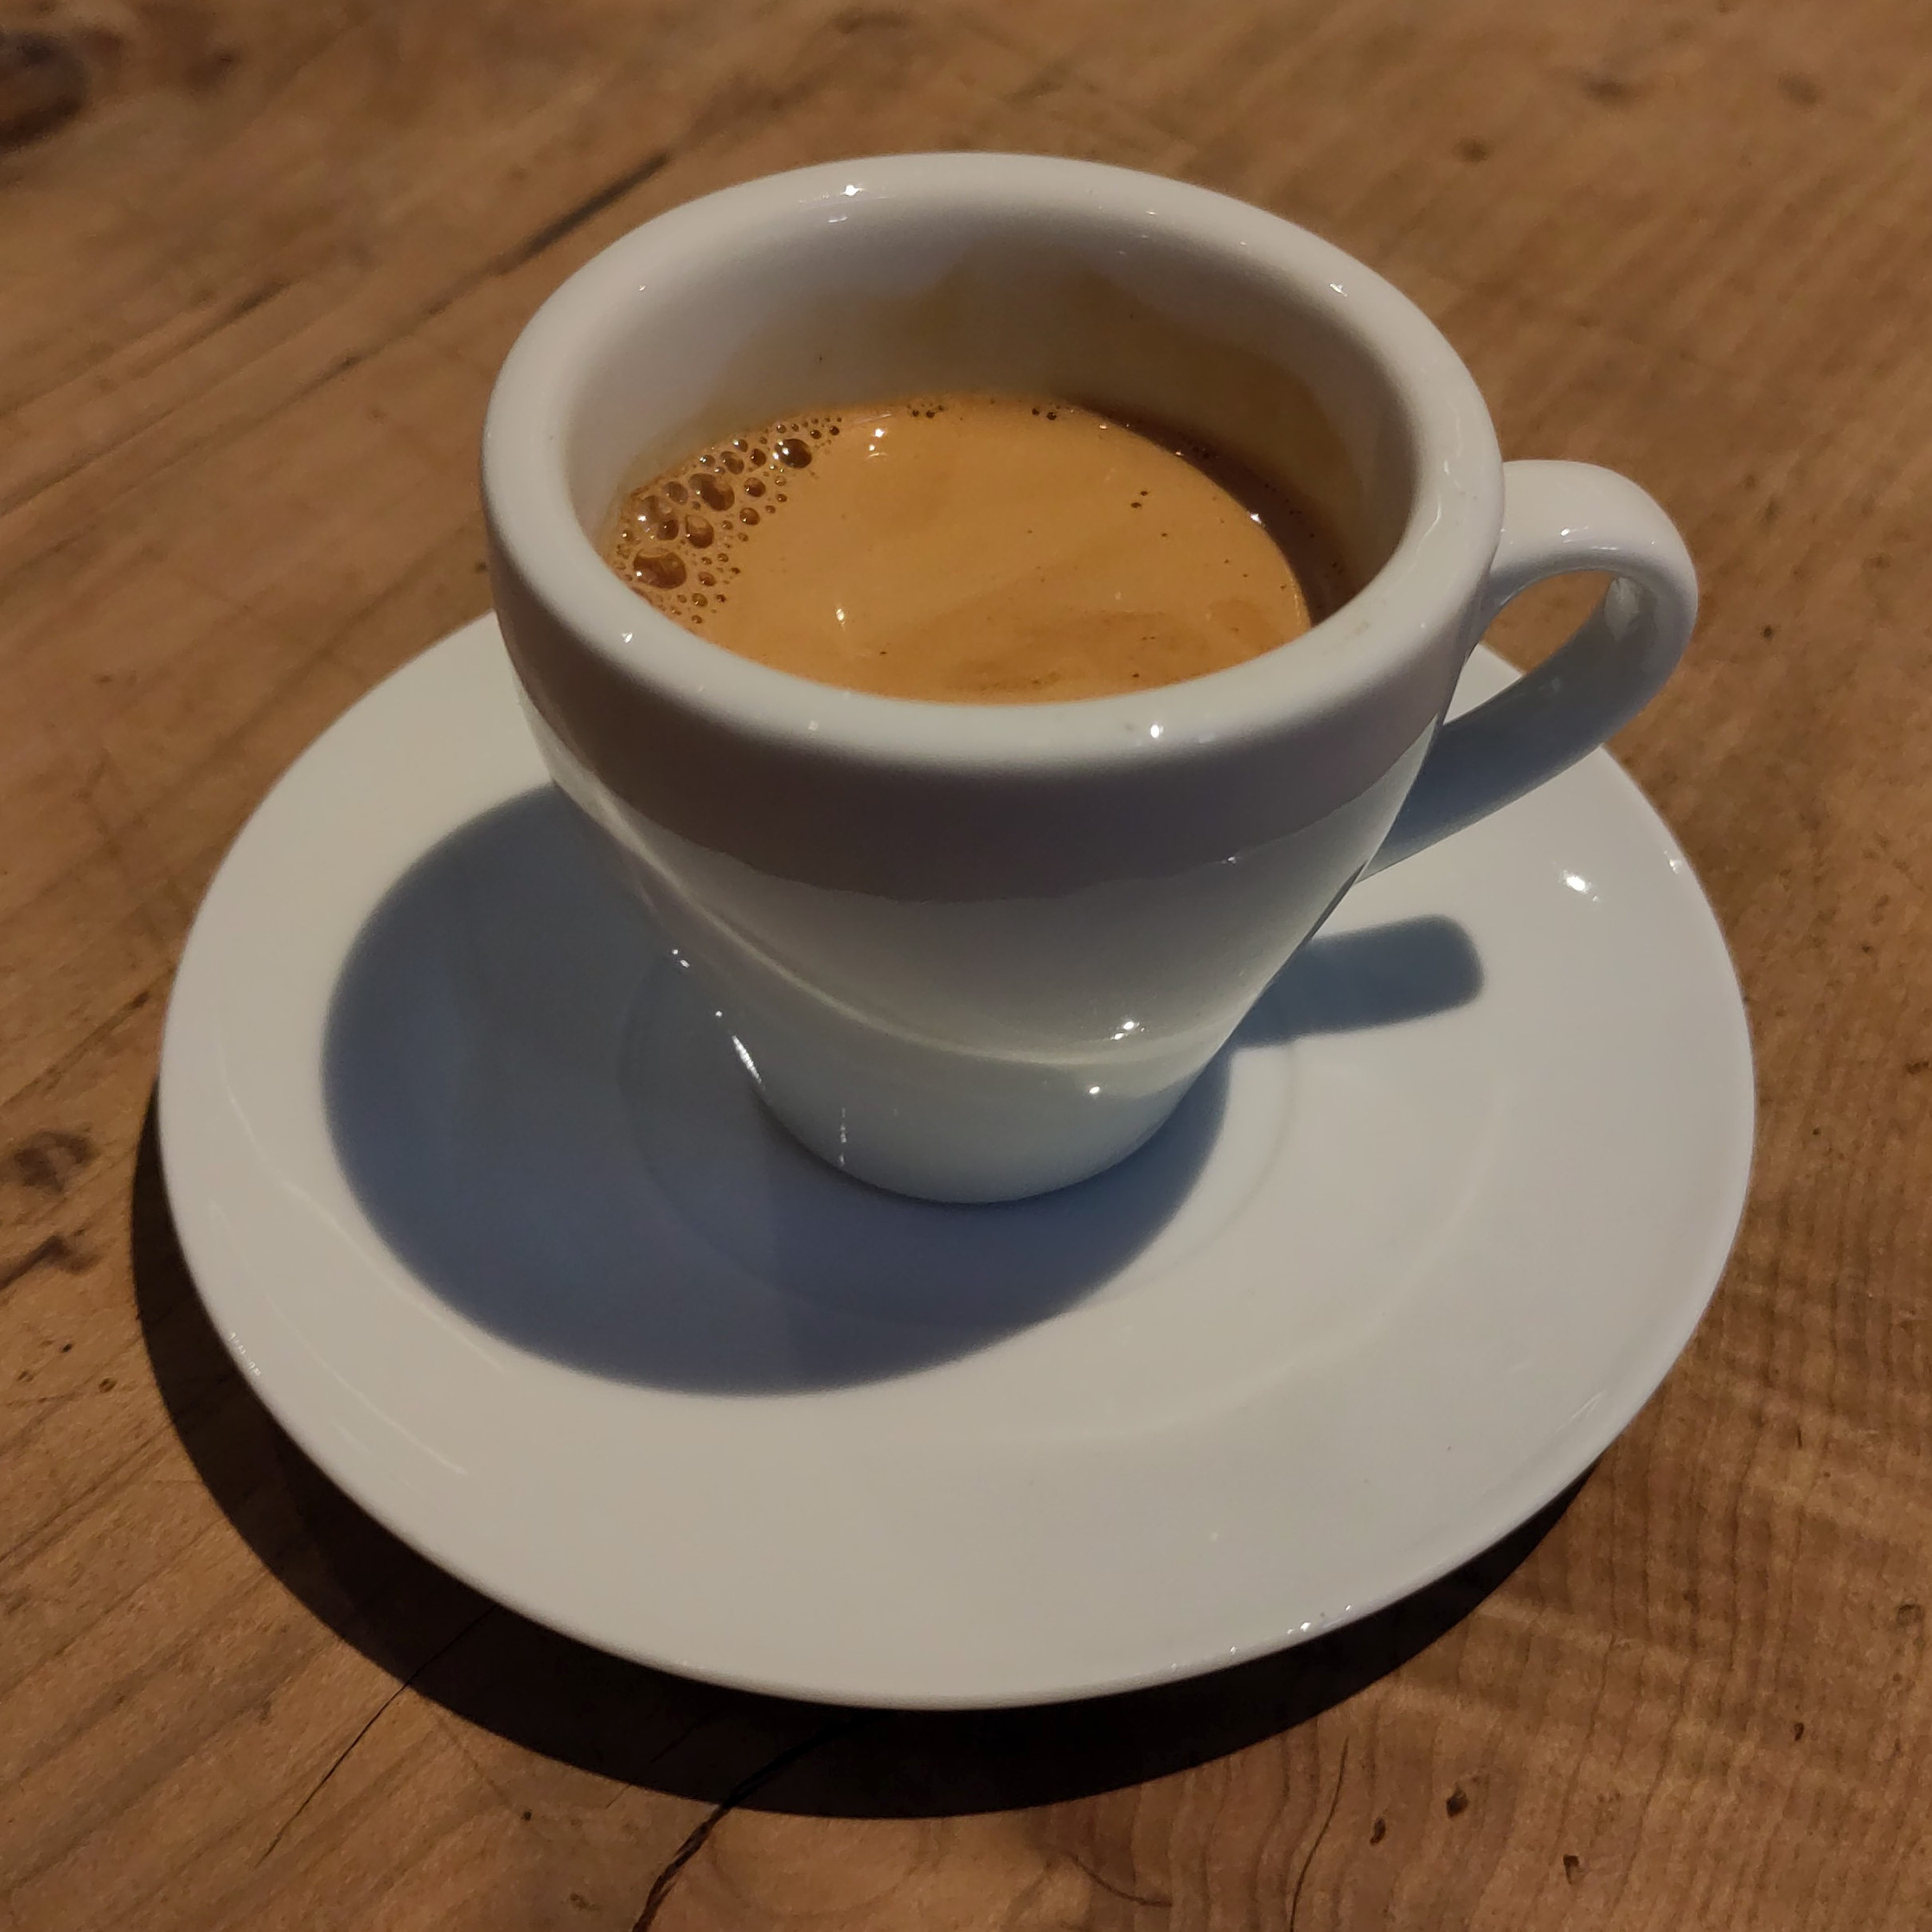 An espresso, served in a classic white cup.